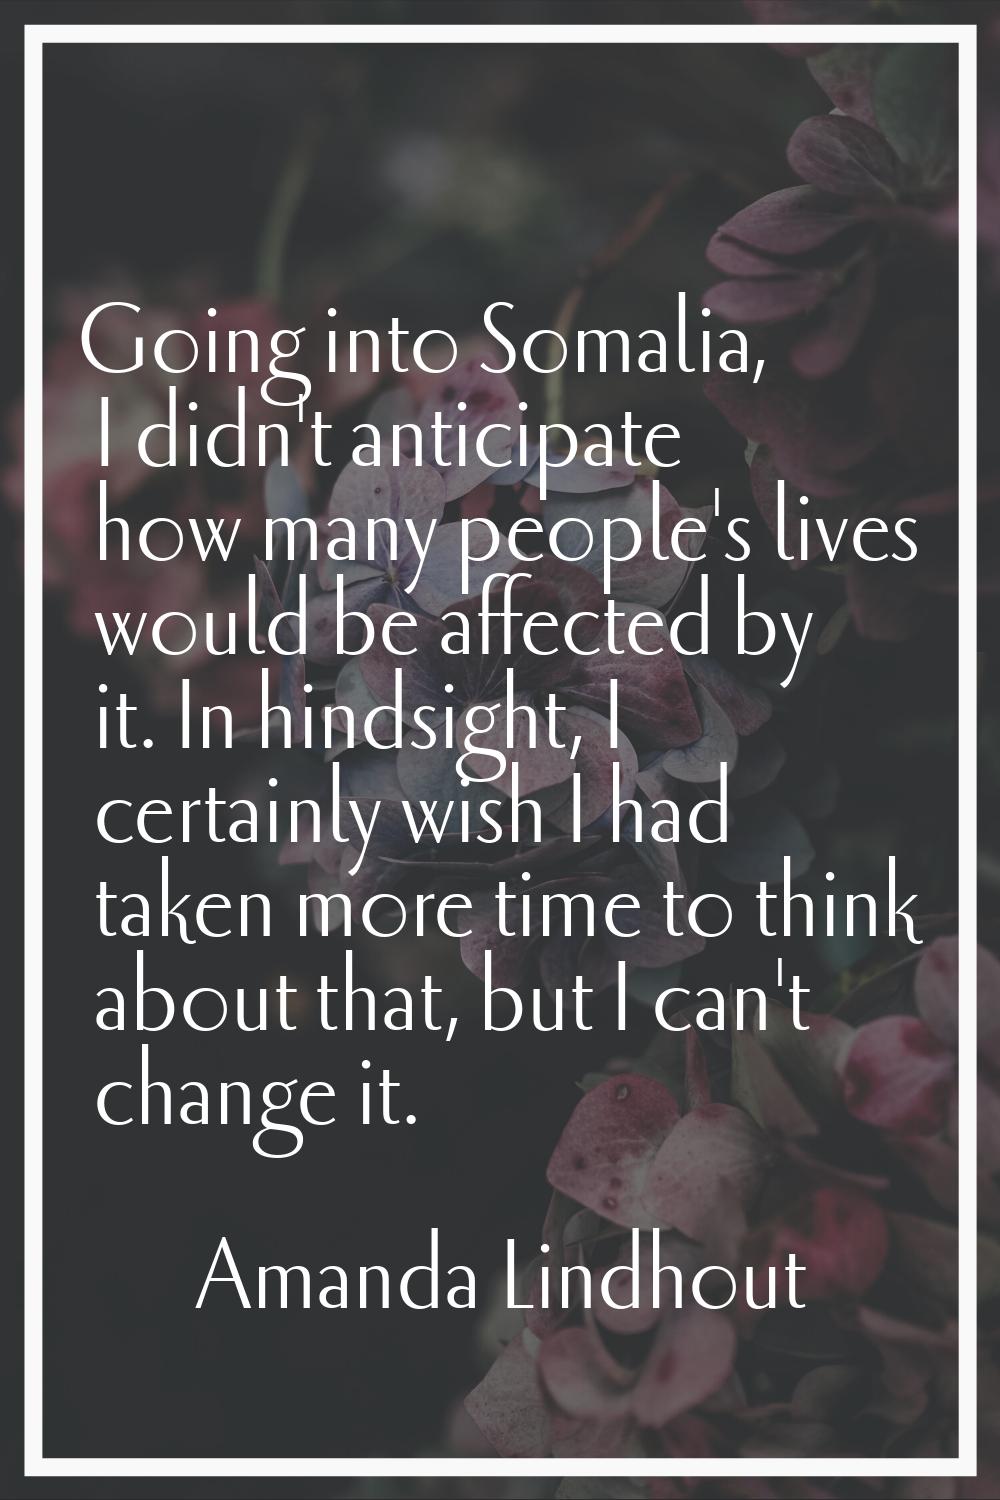 Going into Somalia, I didn't anticipate how many people's lives would be affected by it. In hindsig